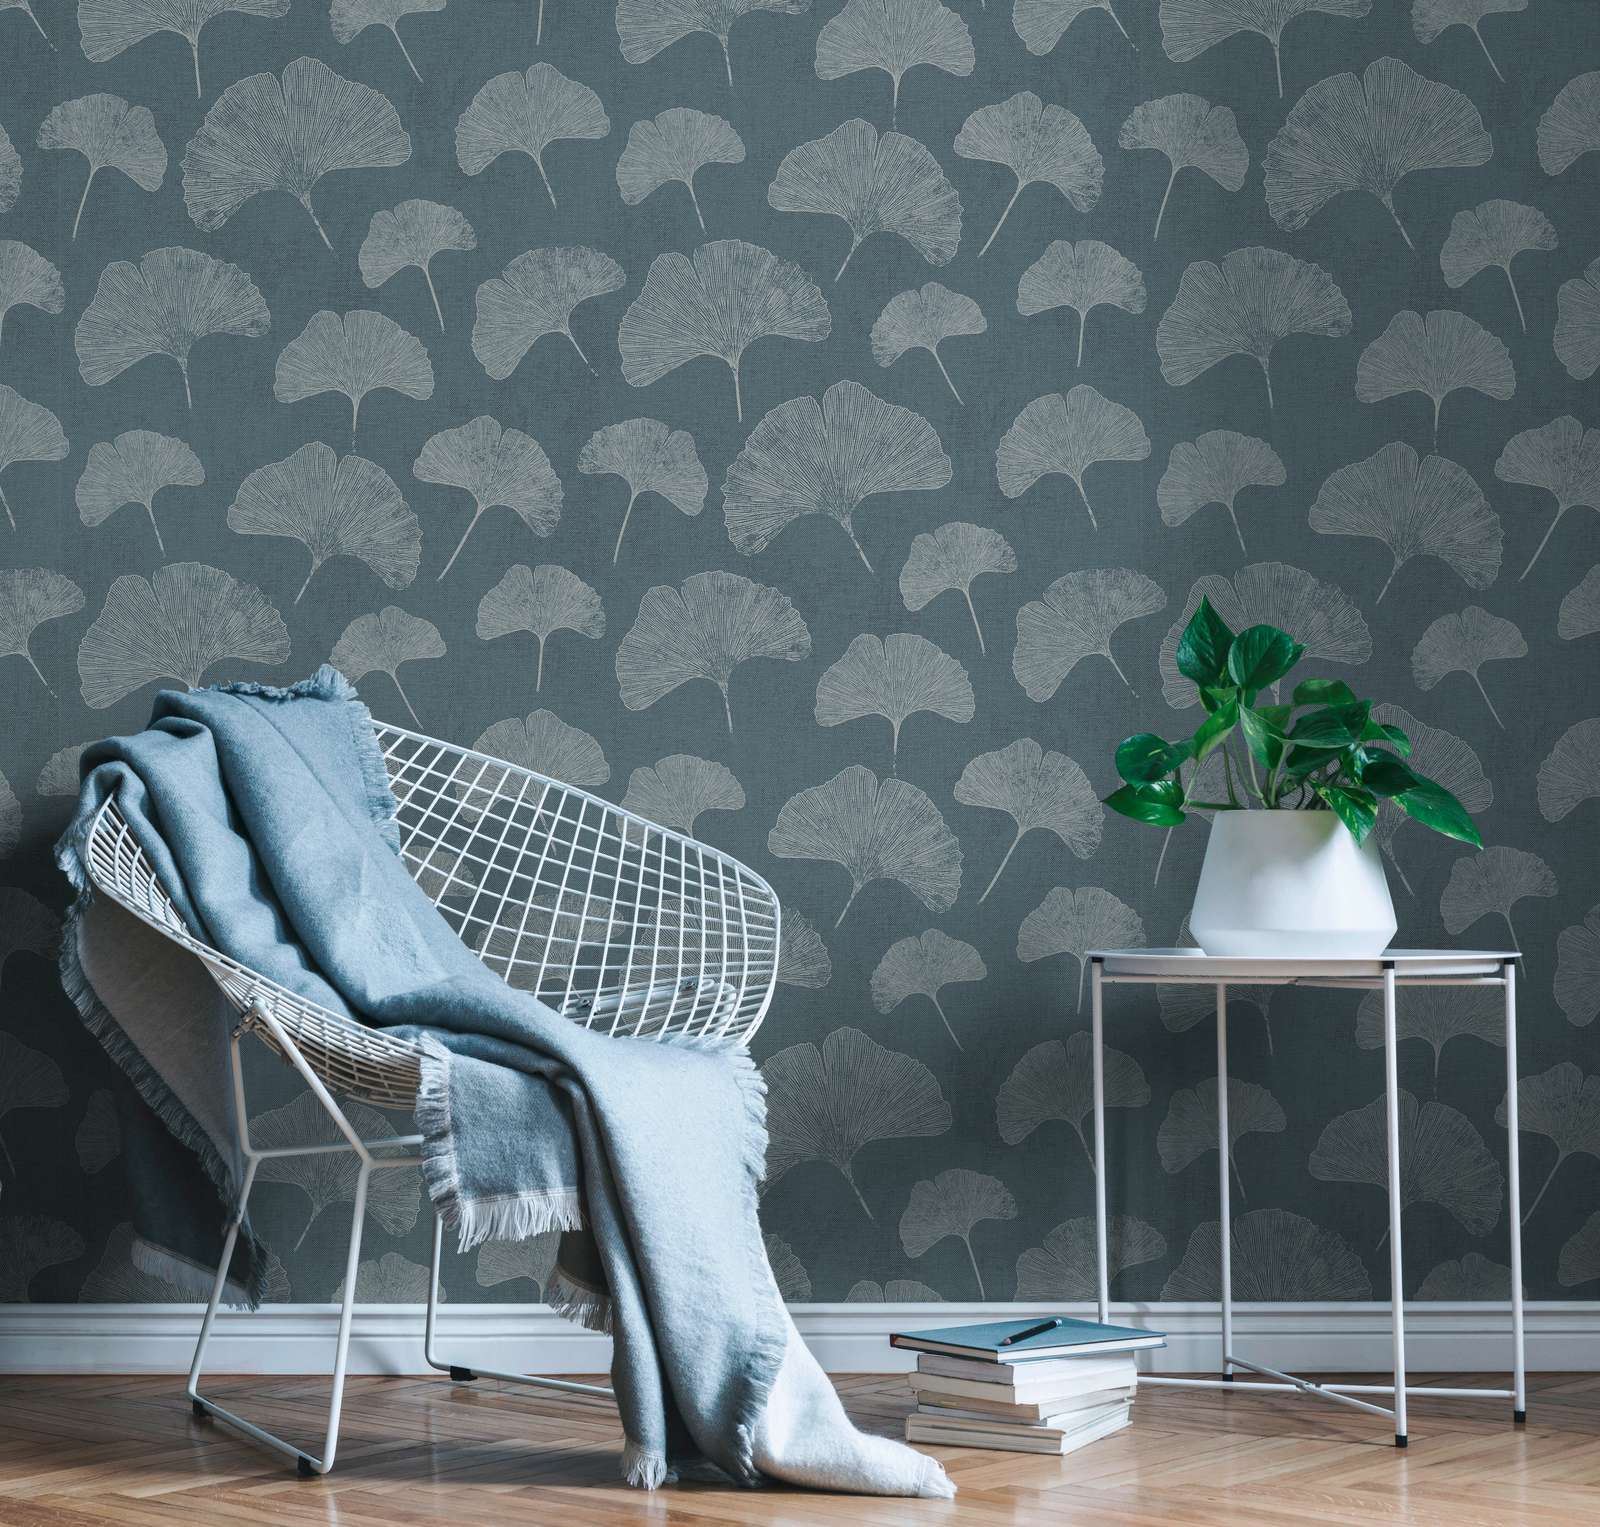             Floral wallpaper with leaves matt textured - blue, white, silver
        